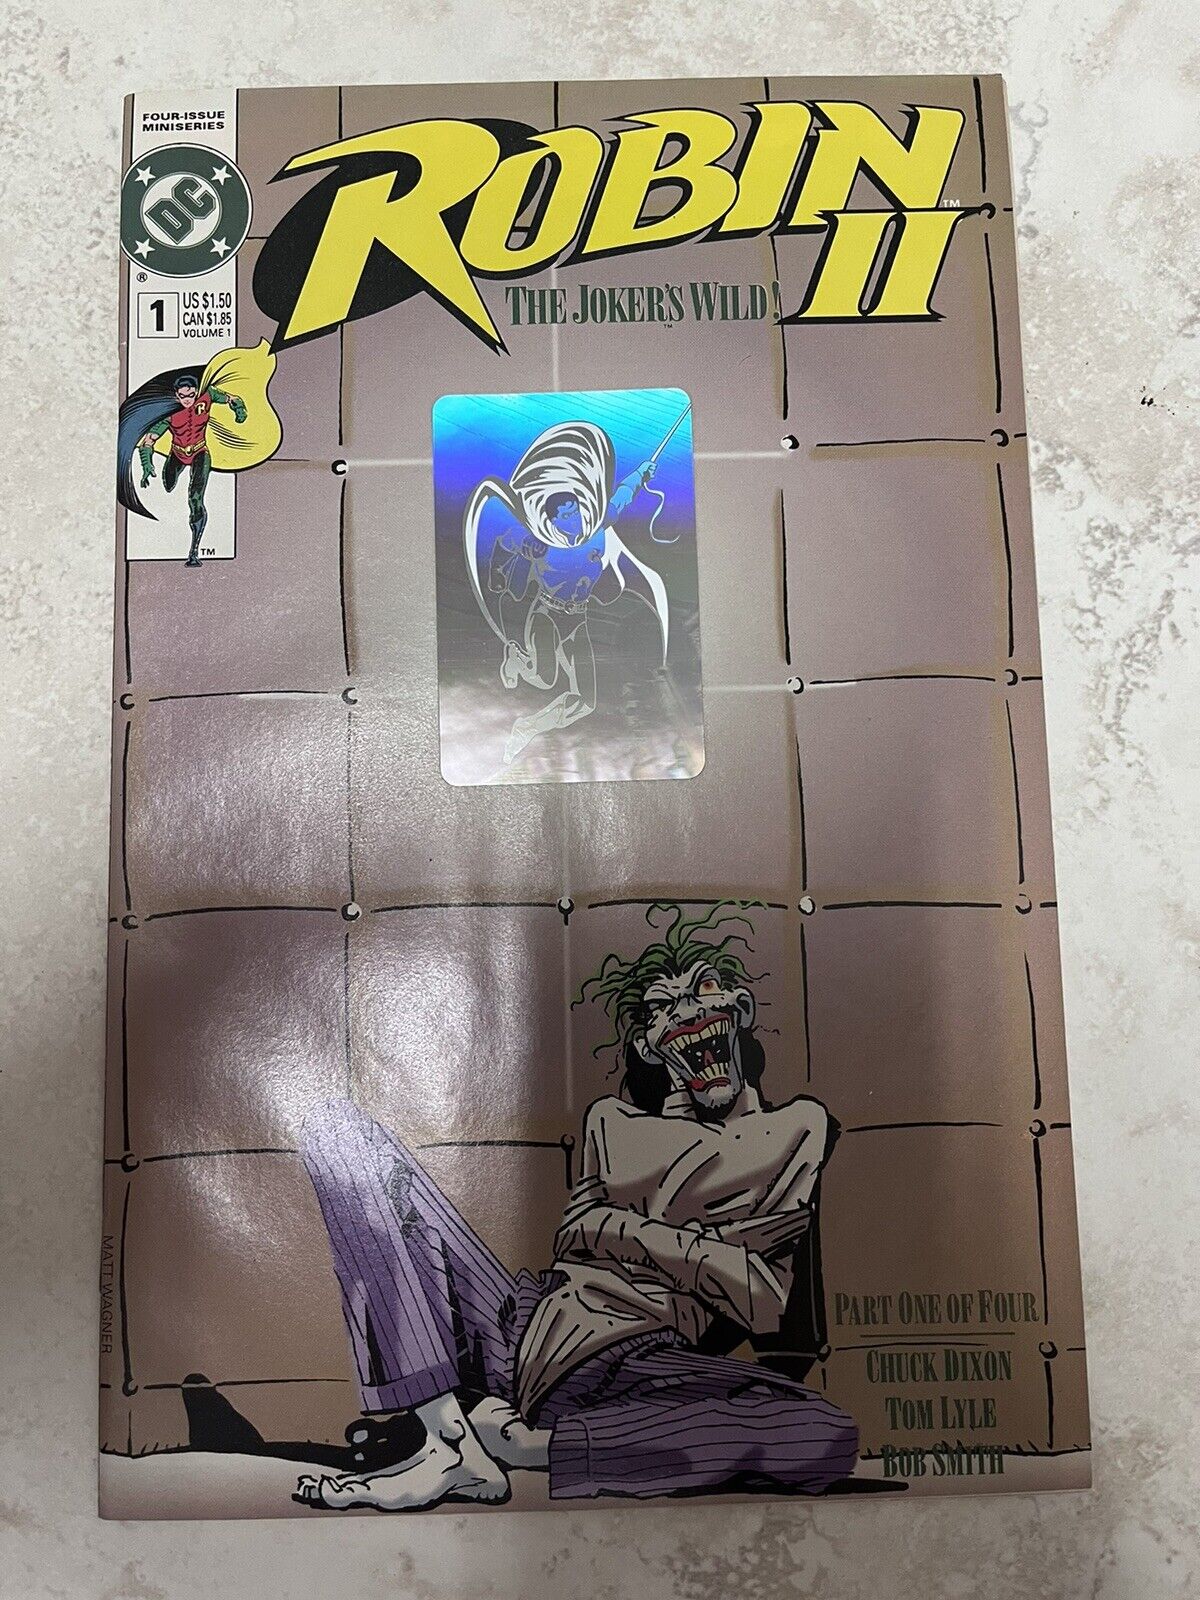 robin 2 the jokers wild Complete SET 1-5 NEAR MINT CONDITION